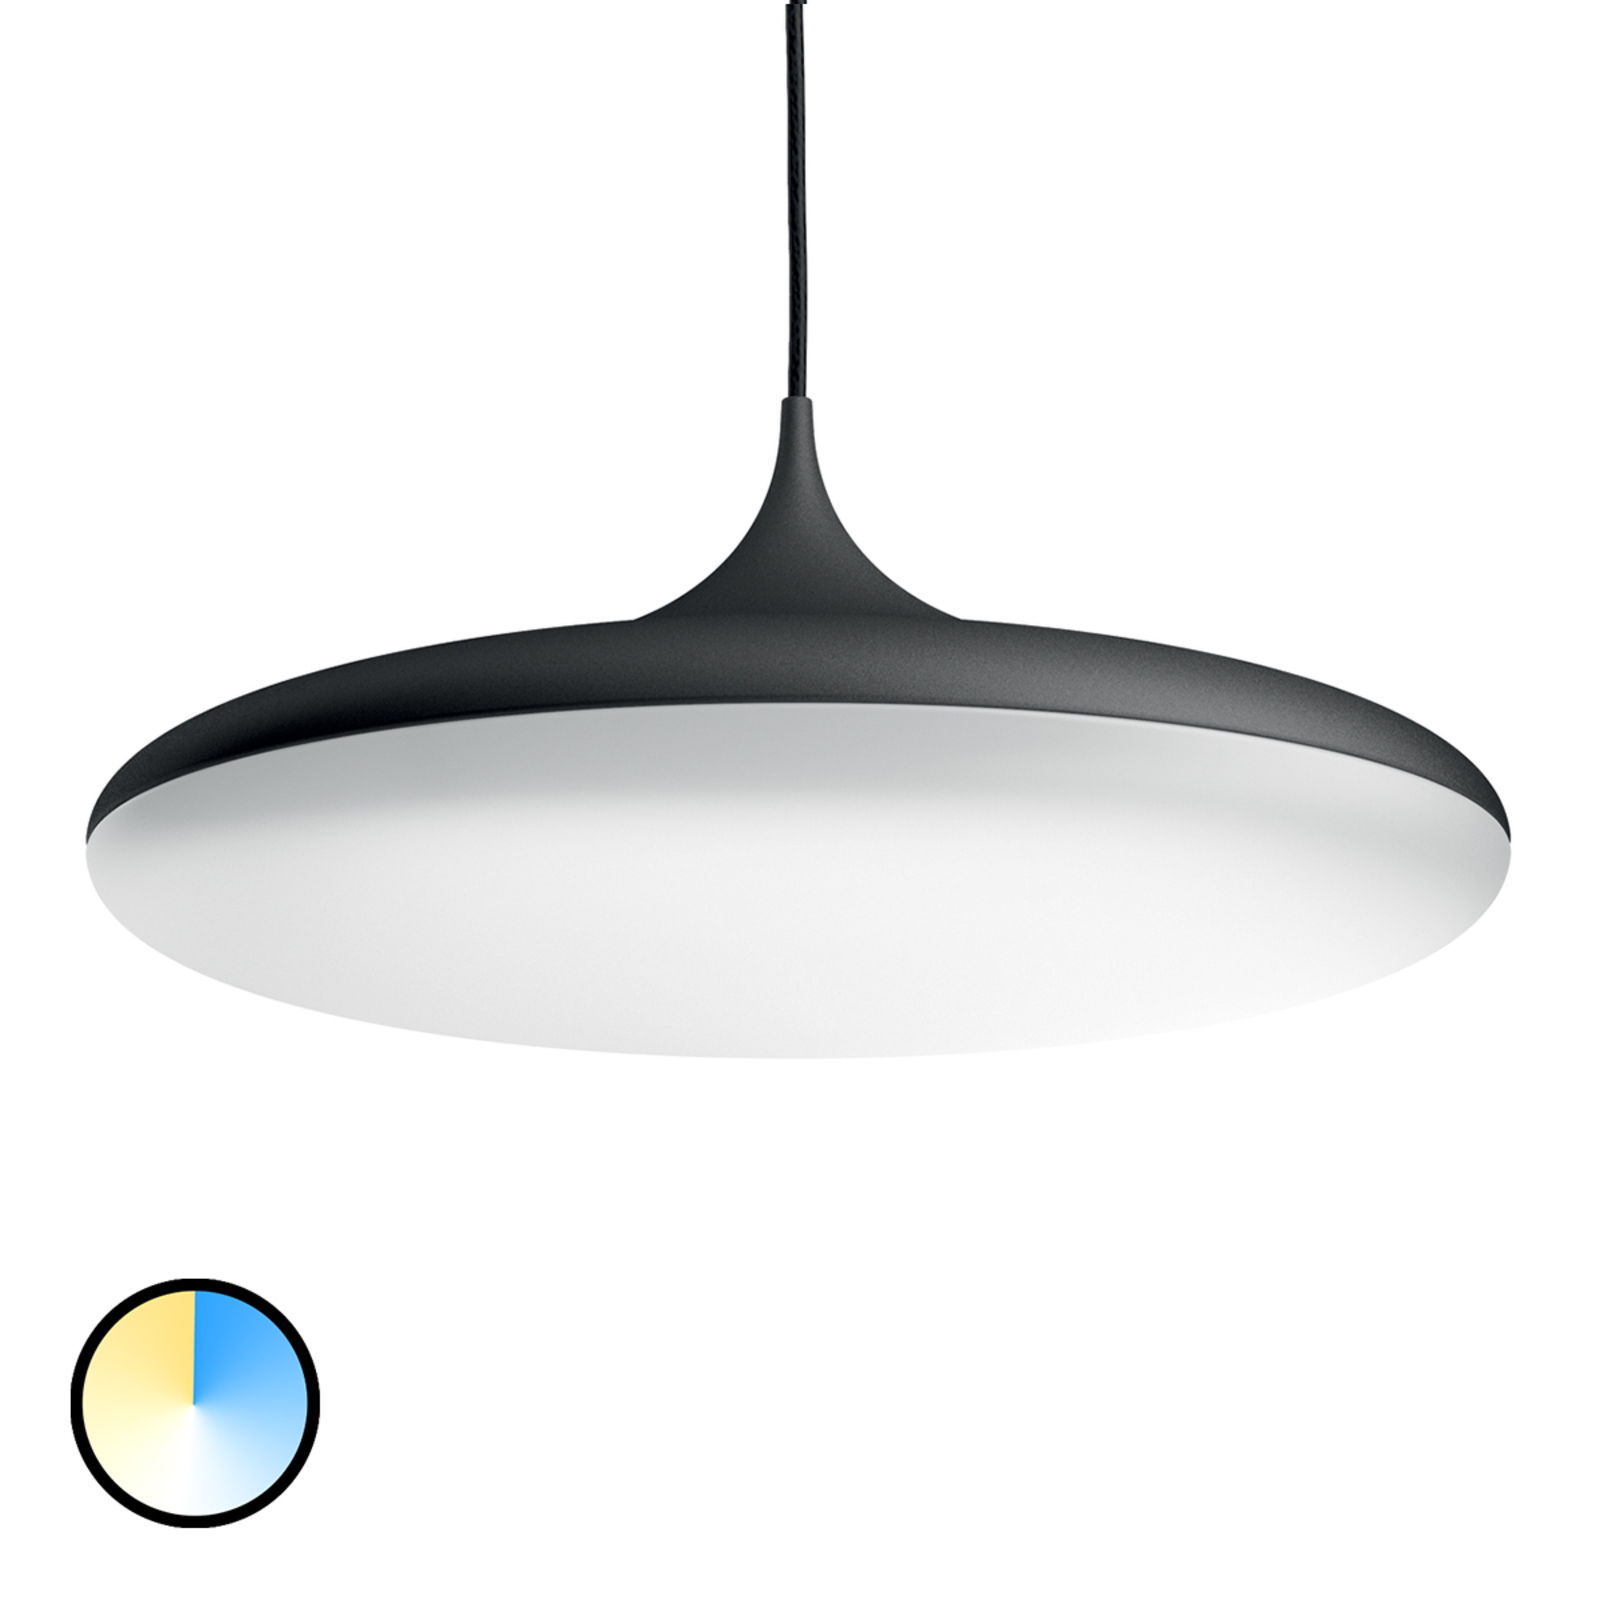 Hue White Ambiance Cher hanglamp | Lampen24.be